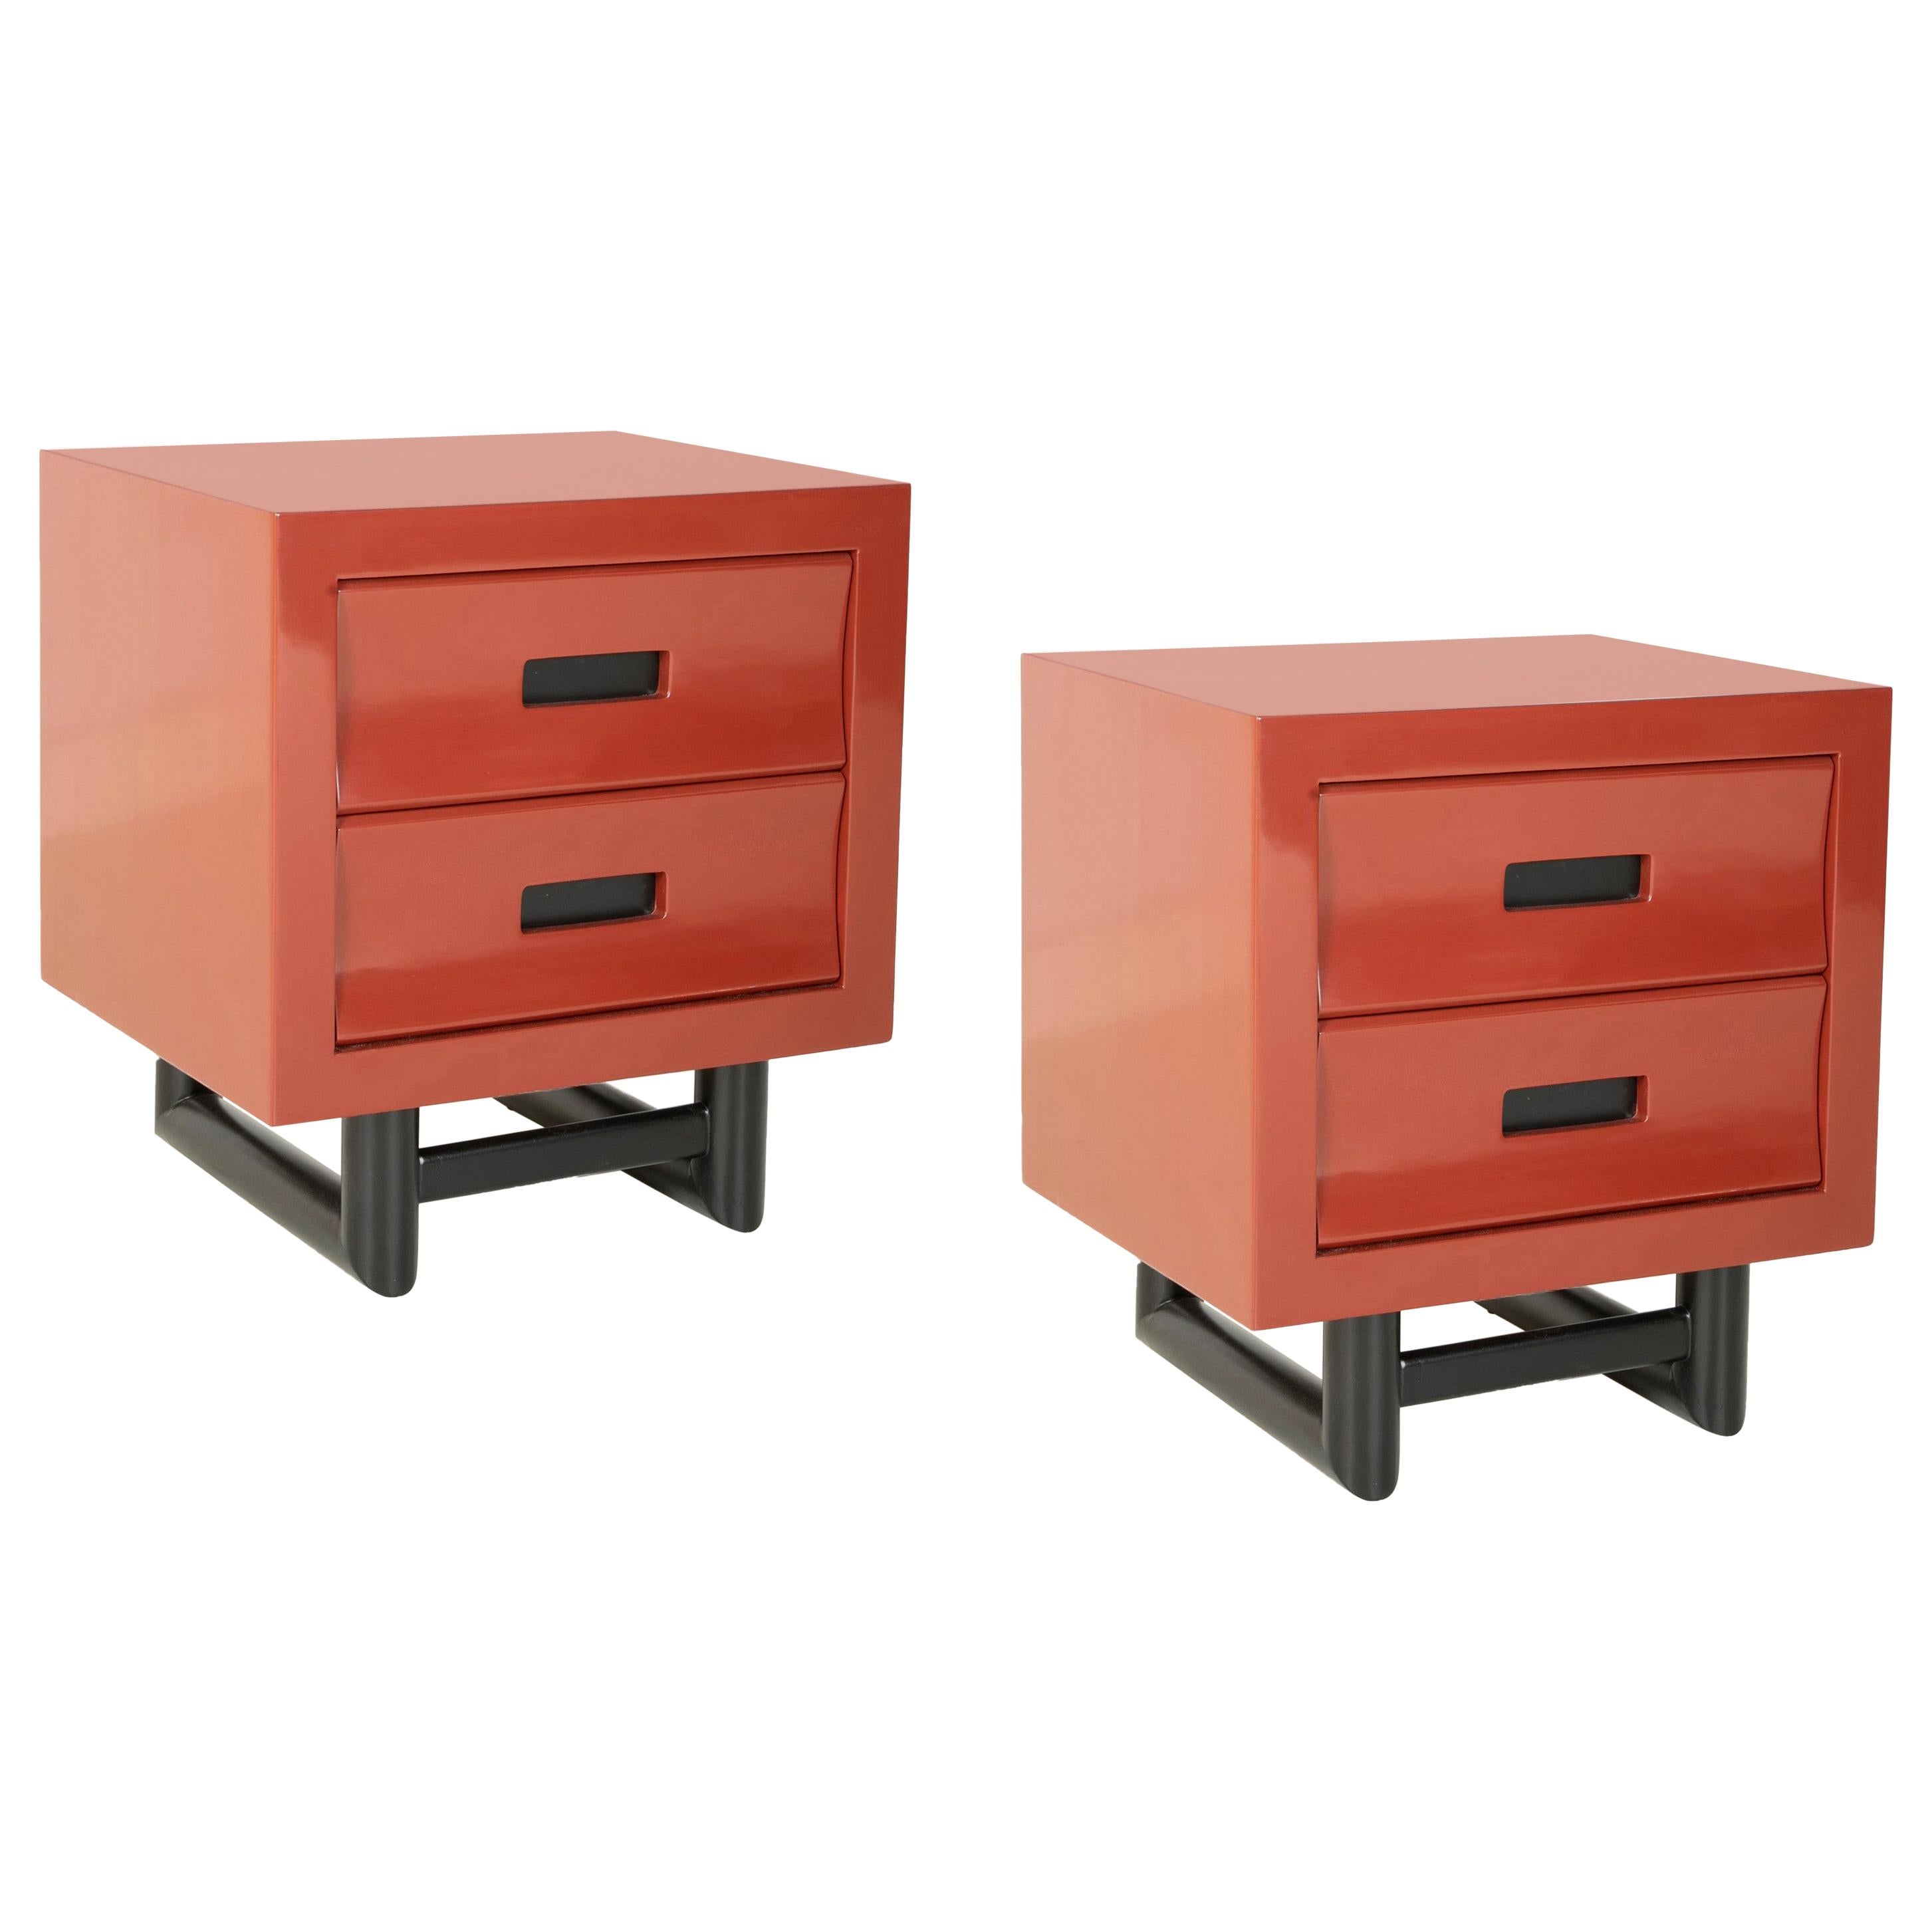 Pair of Lacquered Side Tables in the Manner of Jay Spectre